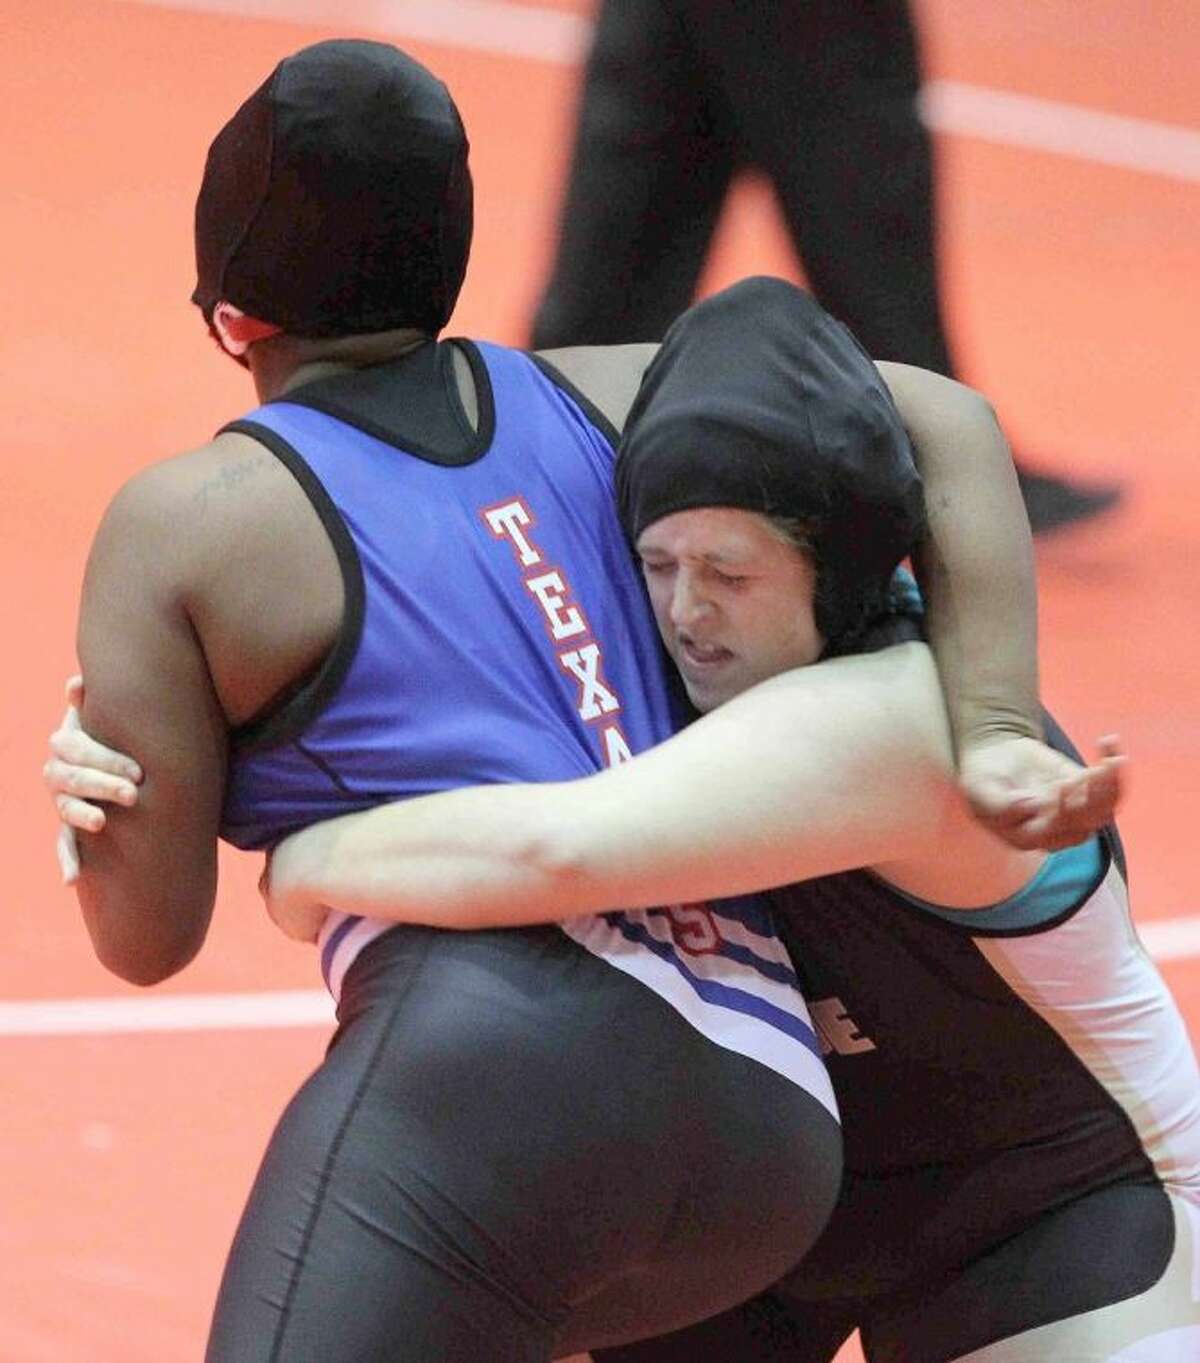 Conroe's Nicola Newton wrestles during a semifinal match at the UIL State Wrestling Championship in Garland Friday.